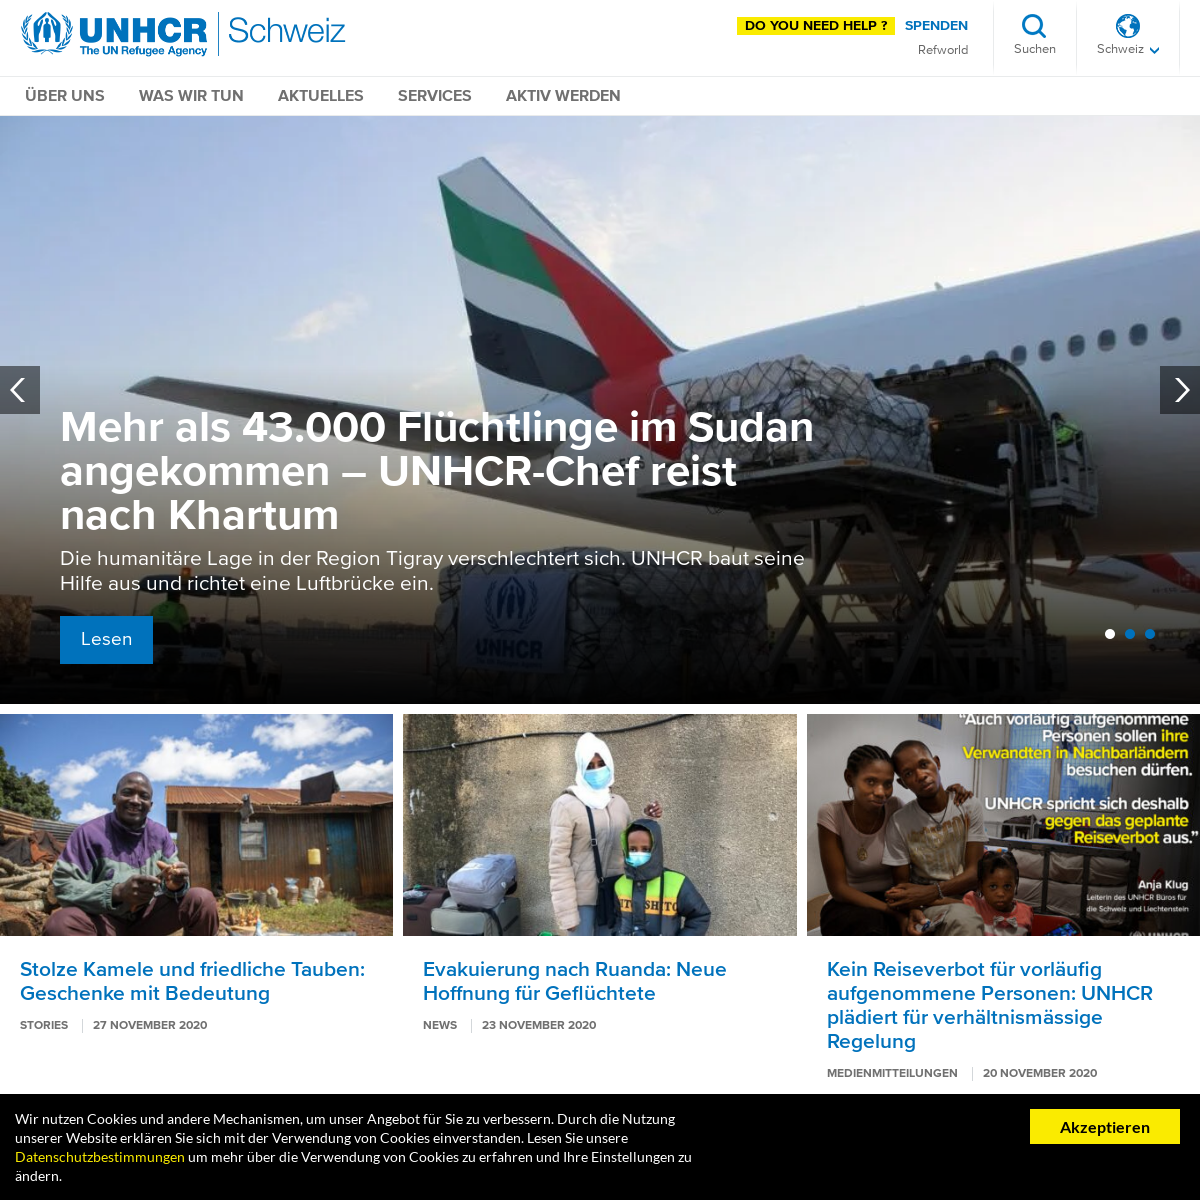 A complete backup of unhcr.ch